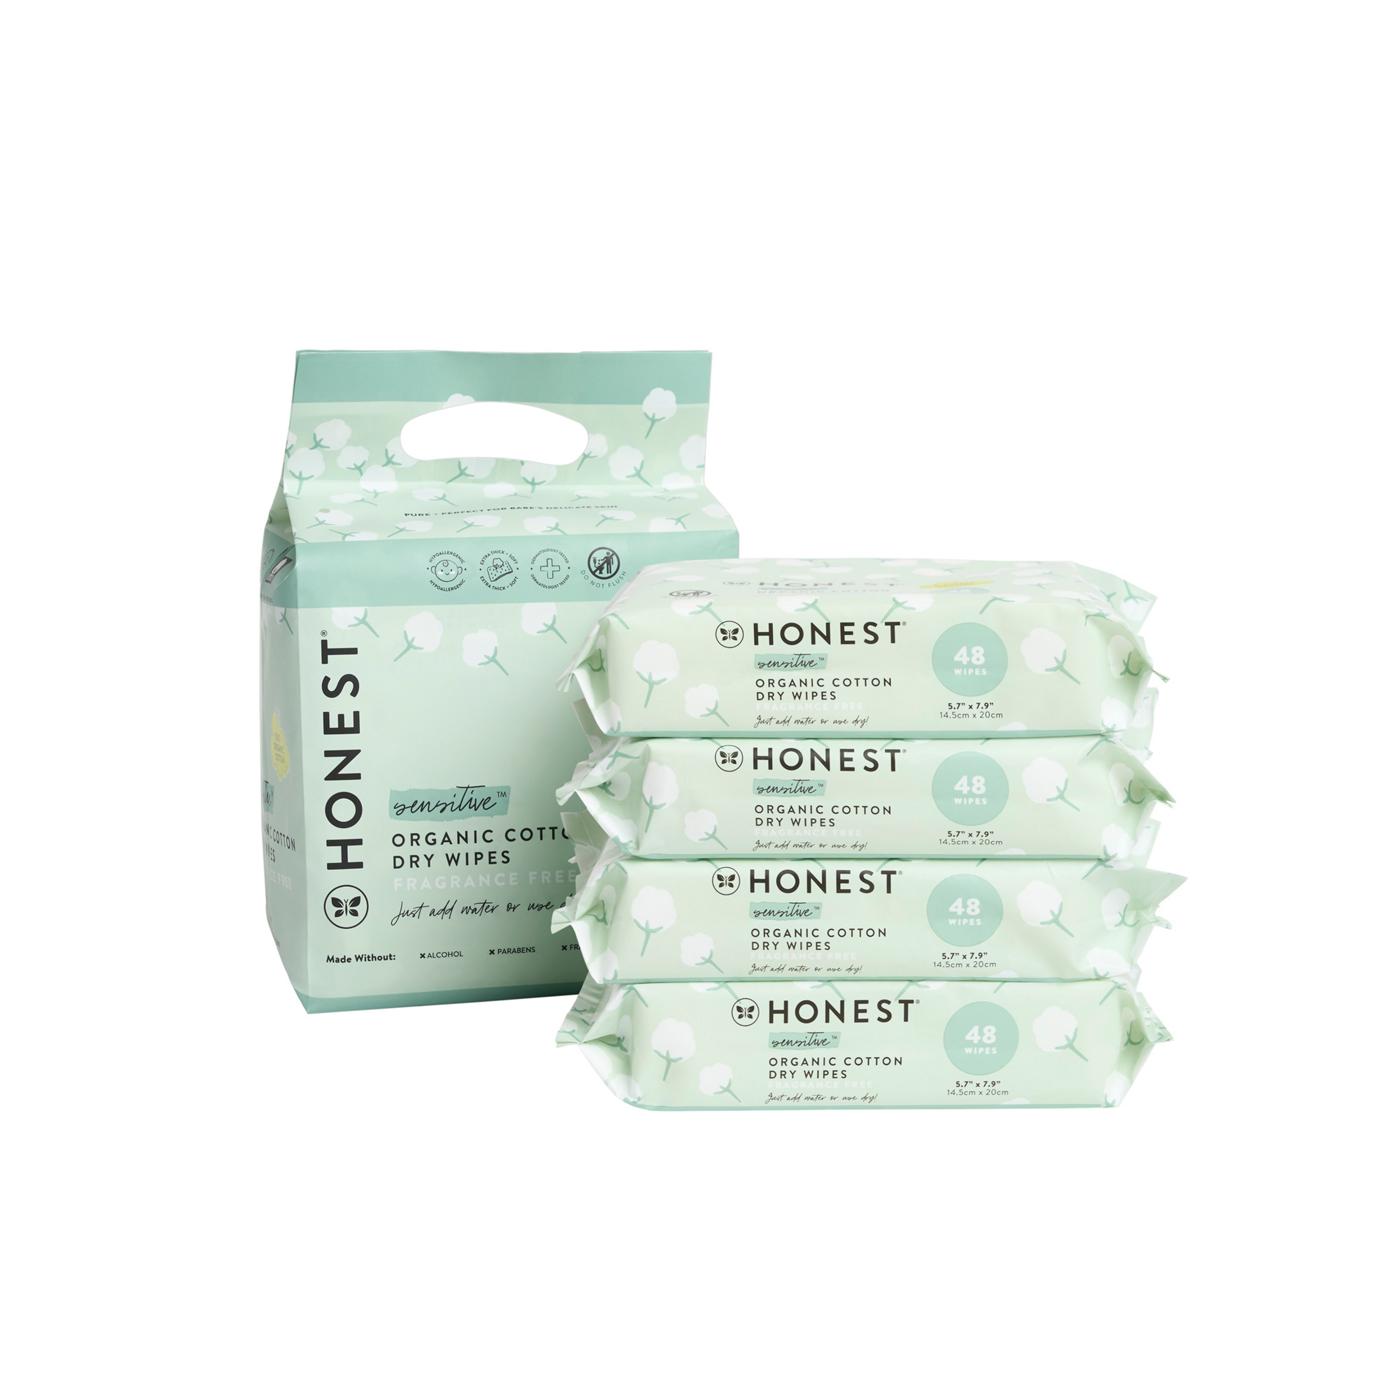 The Honest Company Organic Cotton Dry Wipes 4 Pk; image 3 of 3